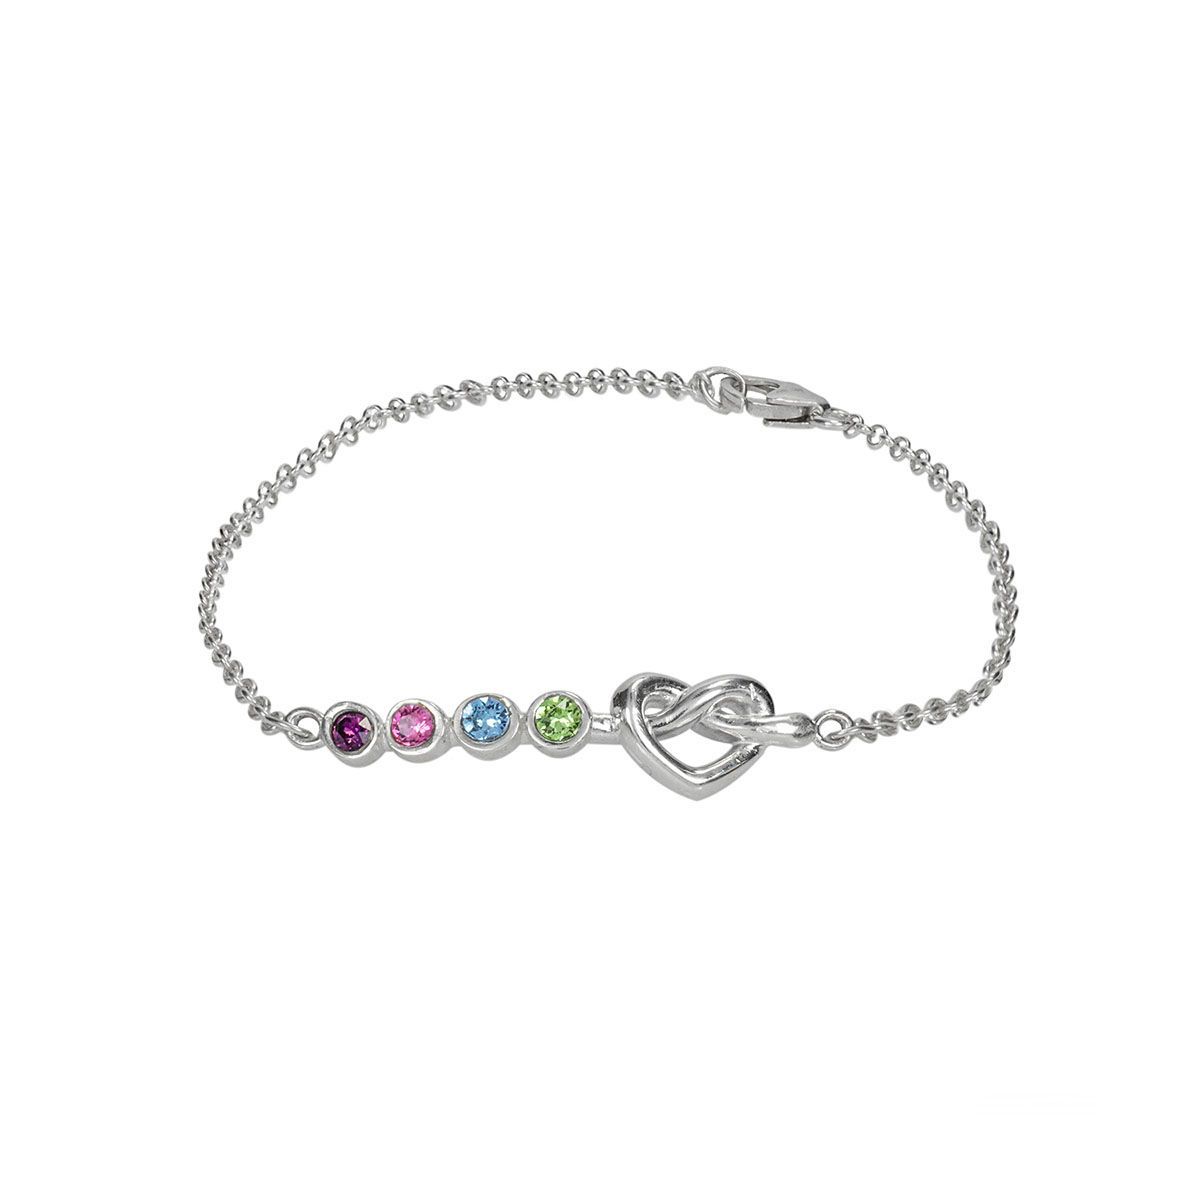 Buy Luv Aj Silver Cross My Heart Anklet in Silver-plated Stainless